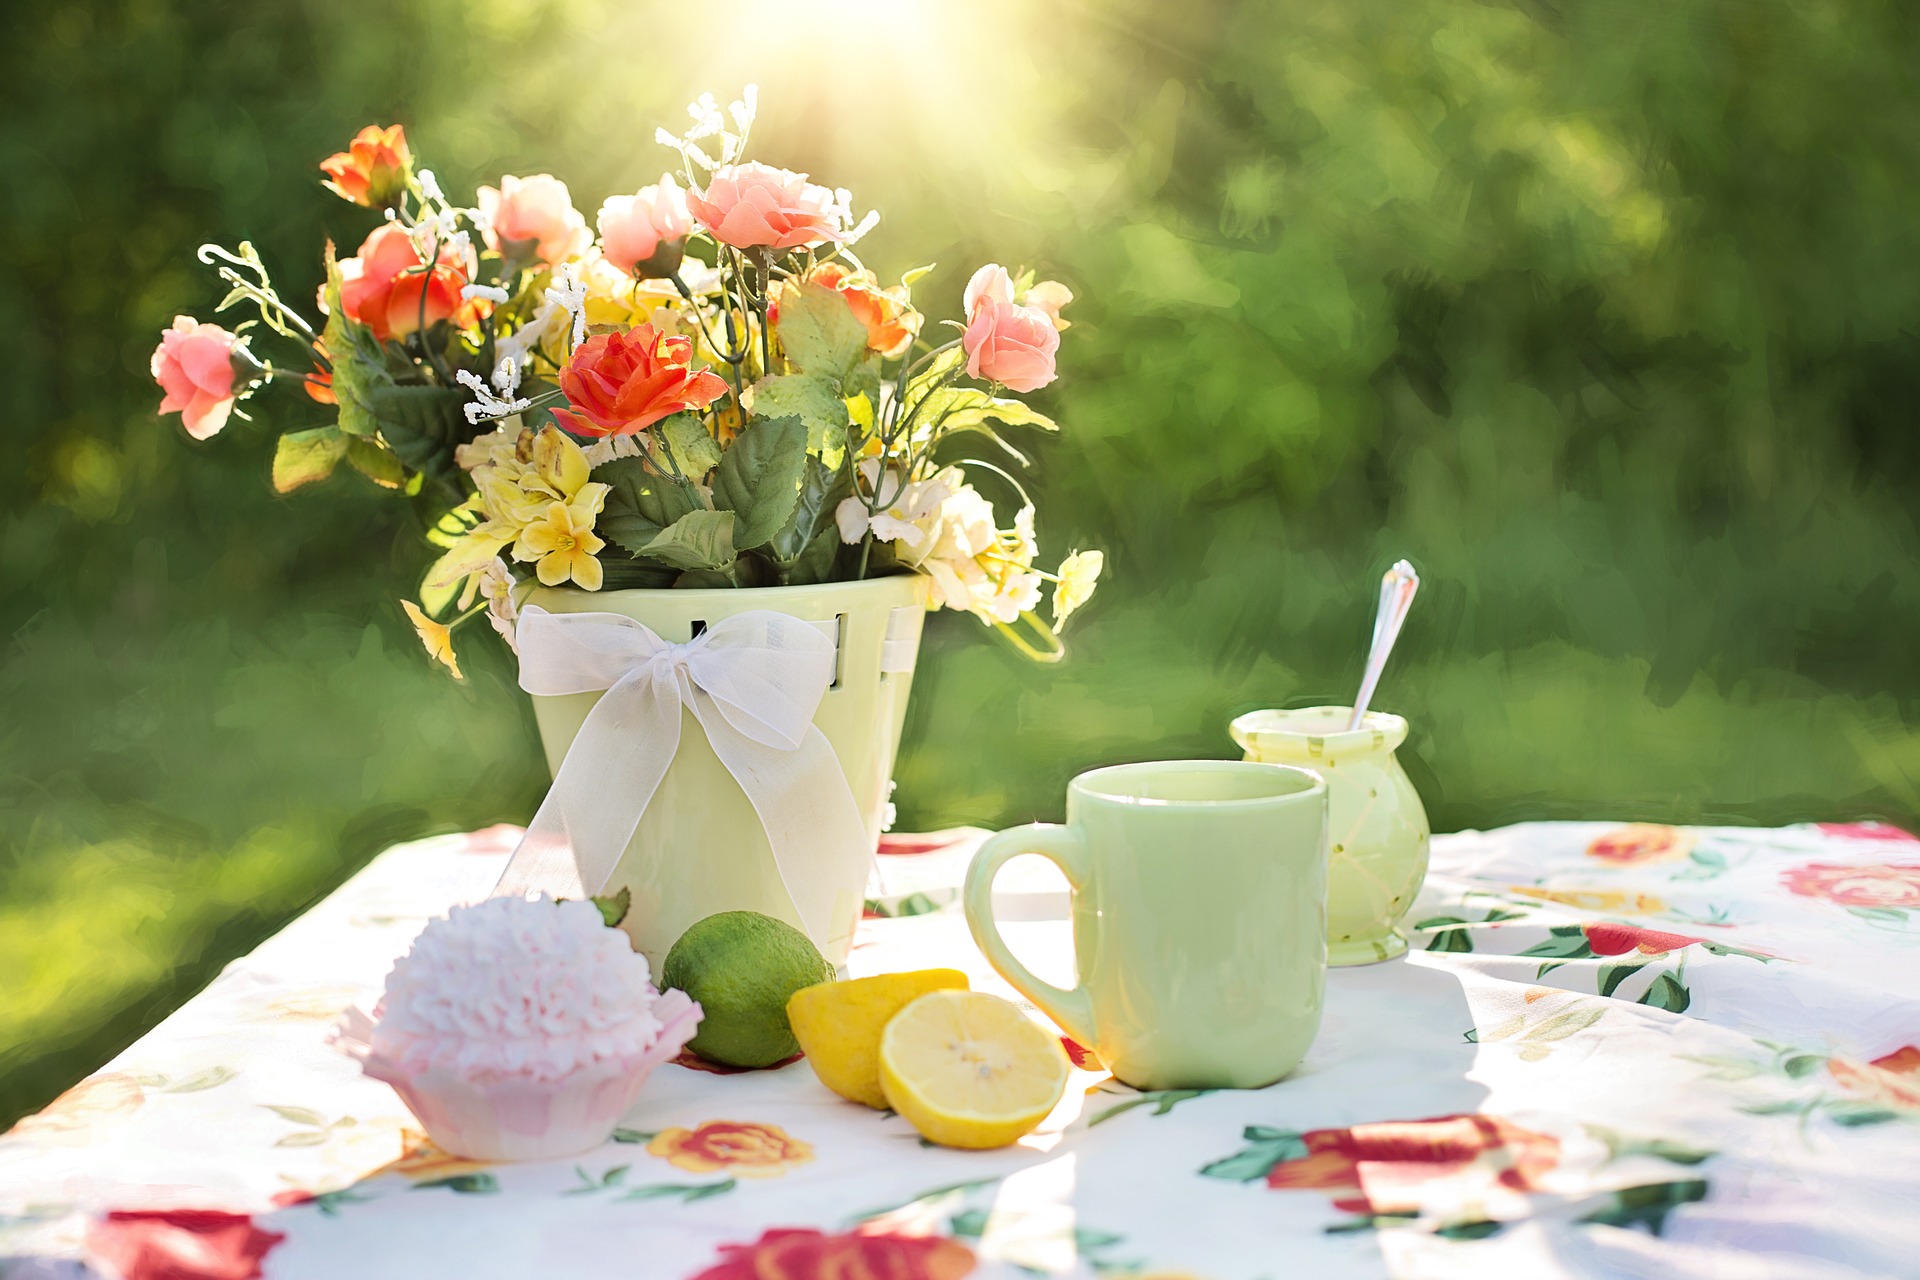 Flowers, food and drink on a table in the sun